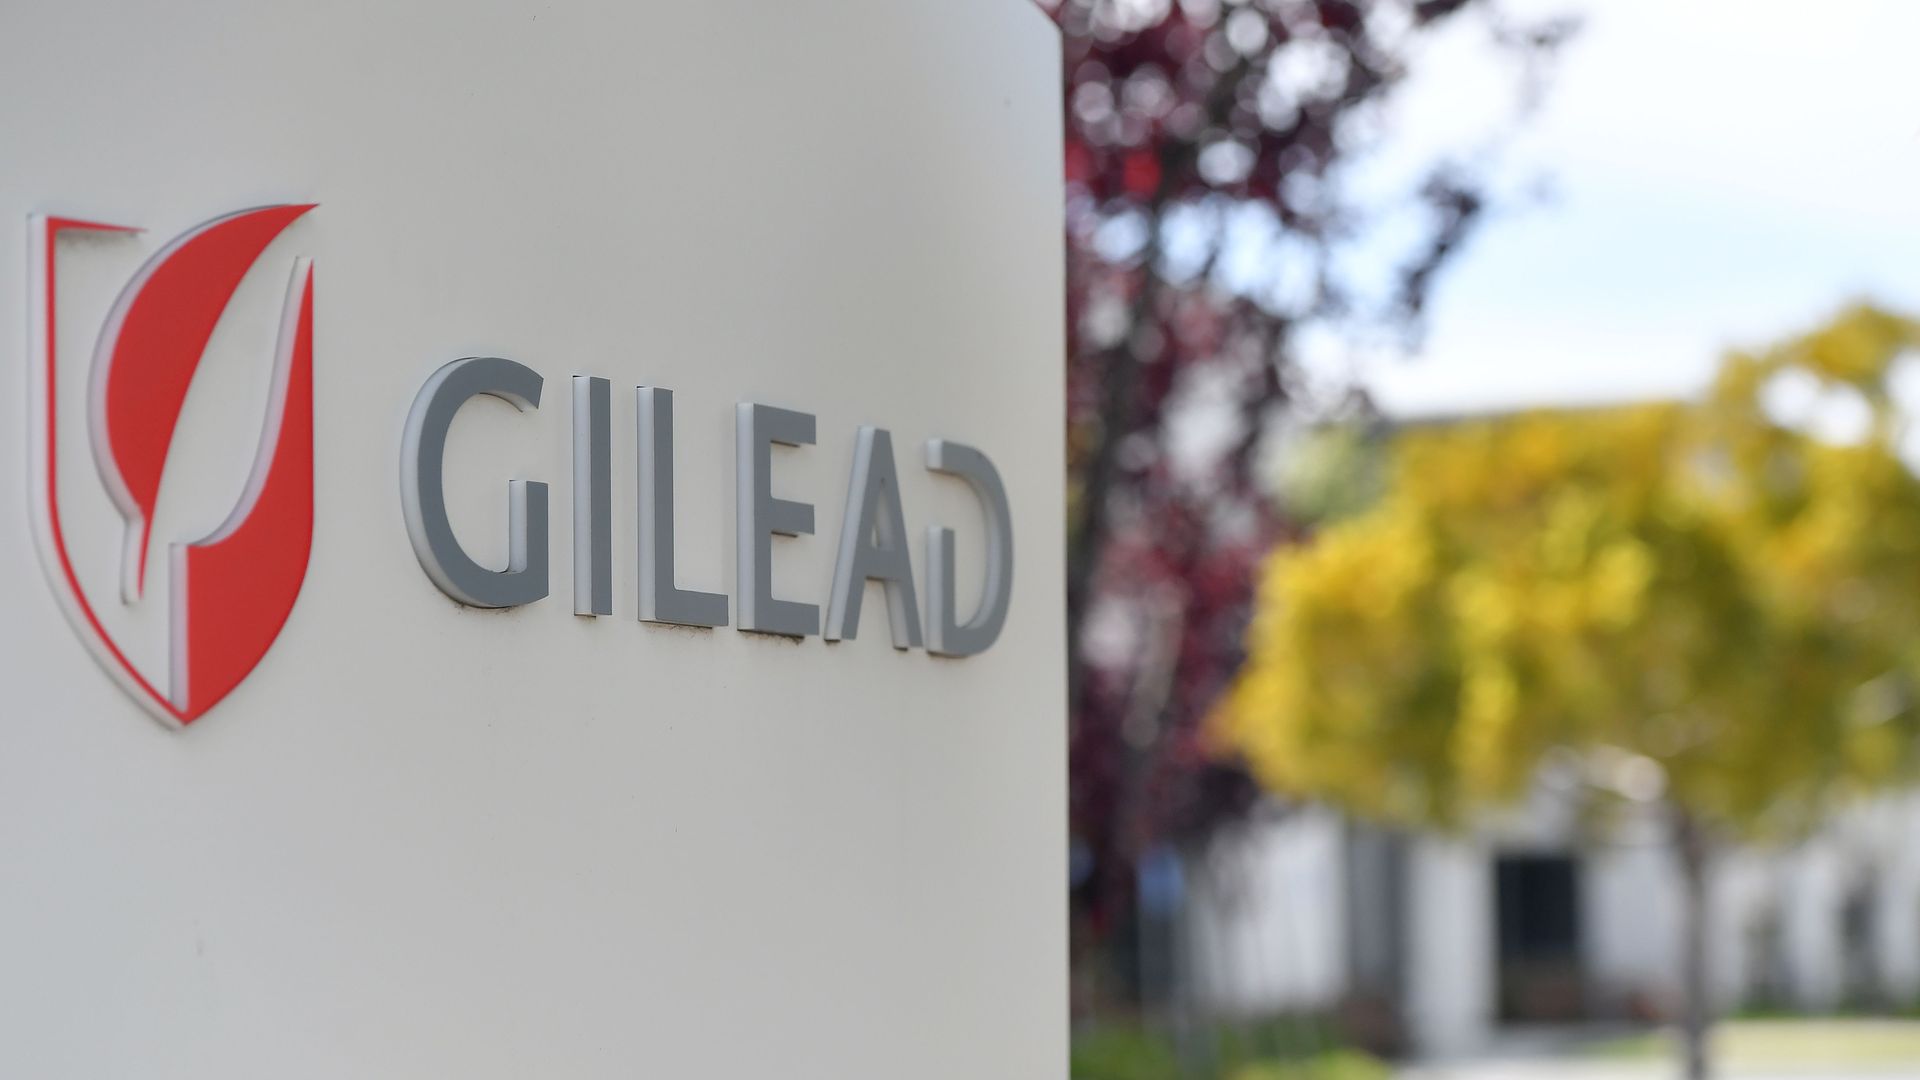 Photo of a white sign that shows the red Gilead logo and name